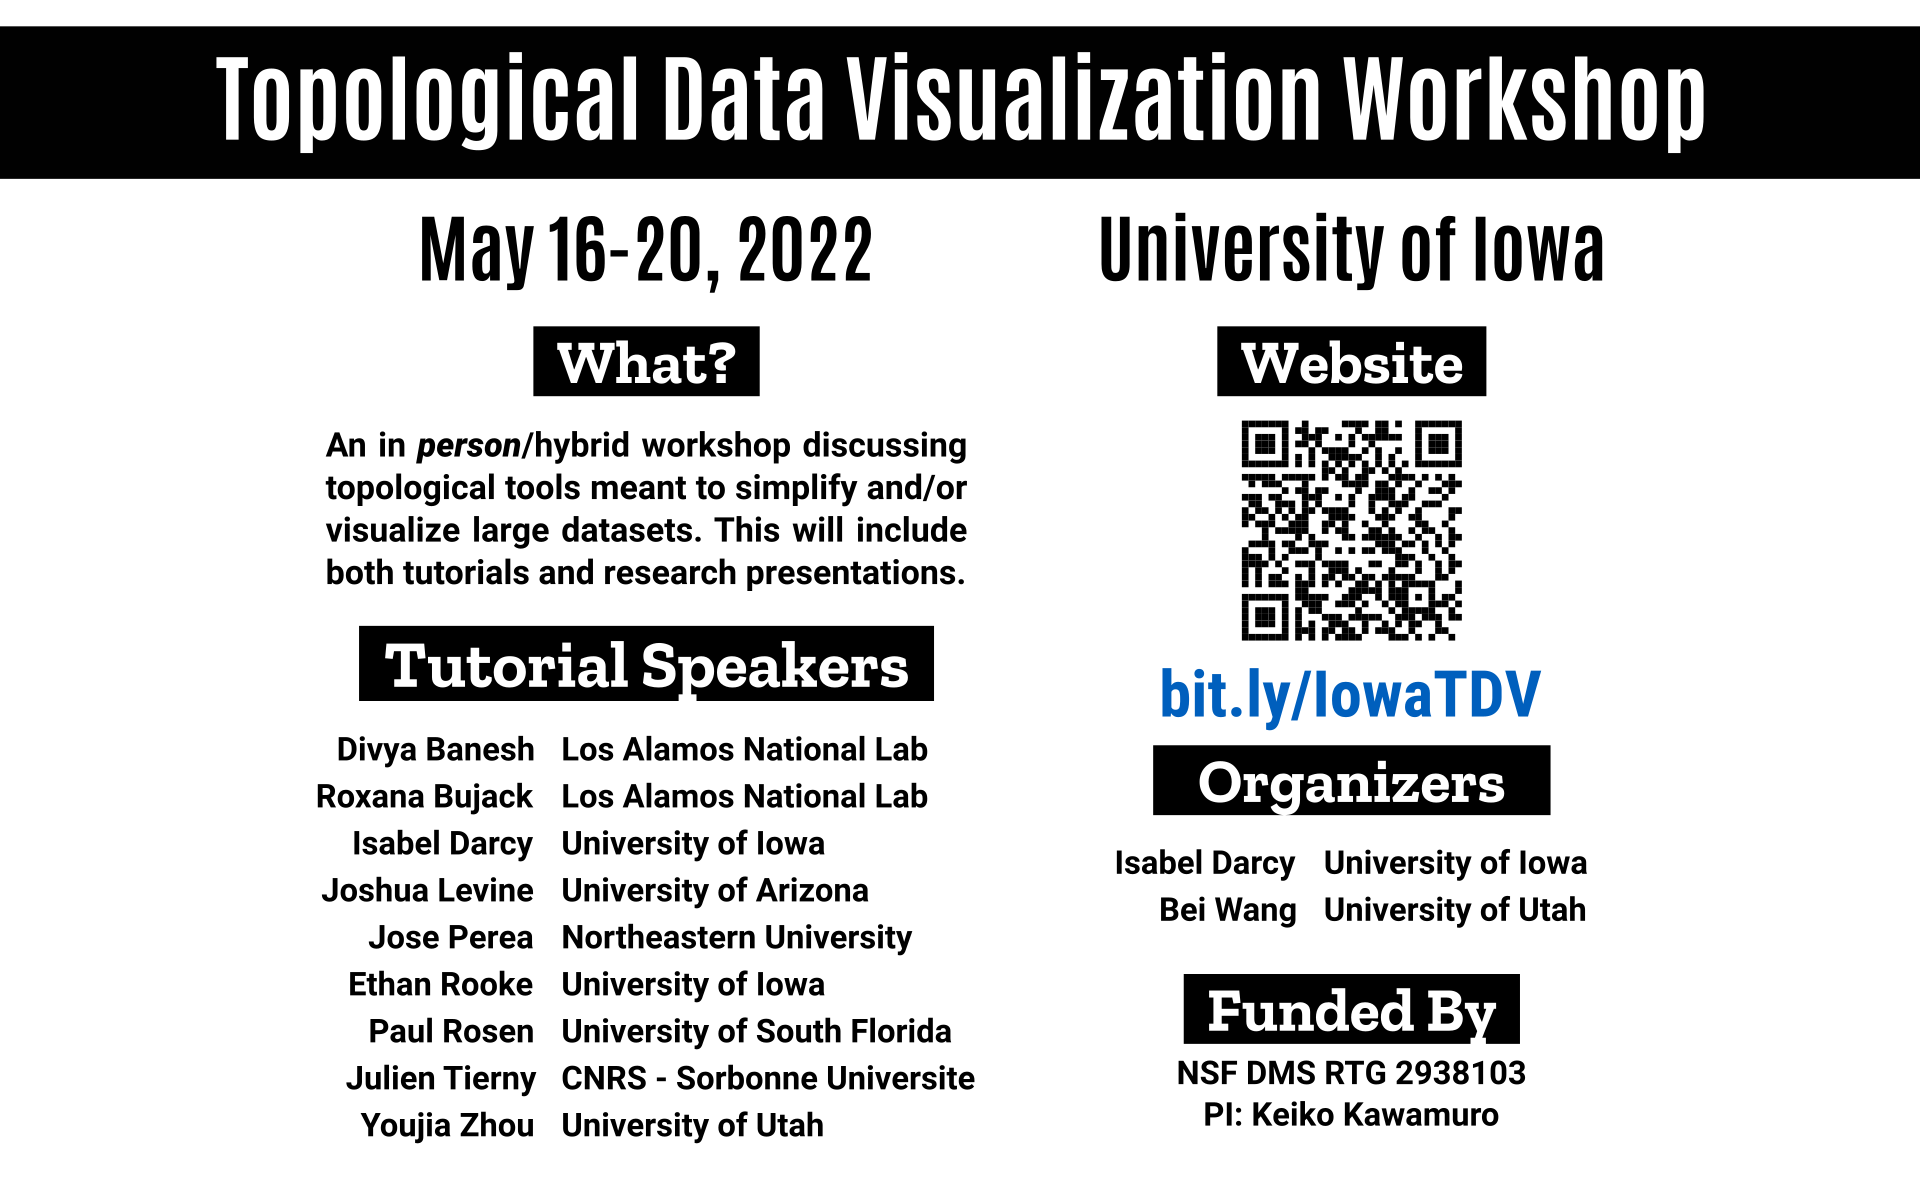 Topological Data Visualization Workshop May 16-20, 2022 What? An in person/hybrid workshop discussing topological tools meant to simplify and/or visualize large datasets. This will include both tutorials and research presentations. Tutorial Speakers Divya Banesh Los Alamos National Lab Roxanna Bujack Los Alamos National Lab Isabel Darcy University of Iowa Joshua Levine University of Arizona Jose Perea Northeastern University Ethan Rooke University of Iowa Paul Rosen University of South Florida Julien Tierny CNRS - Sorbonne Universite Youjia Zhou University of Utah Website bit.ly/IowaTDV Organizers Isabel Darcy University of Iowa Bei Wang University of Utah Funded By NSF DMS RTG 2938103 PI: Keiko Kawamuro